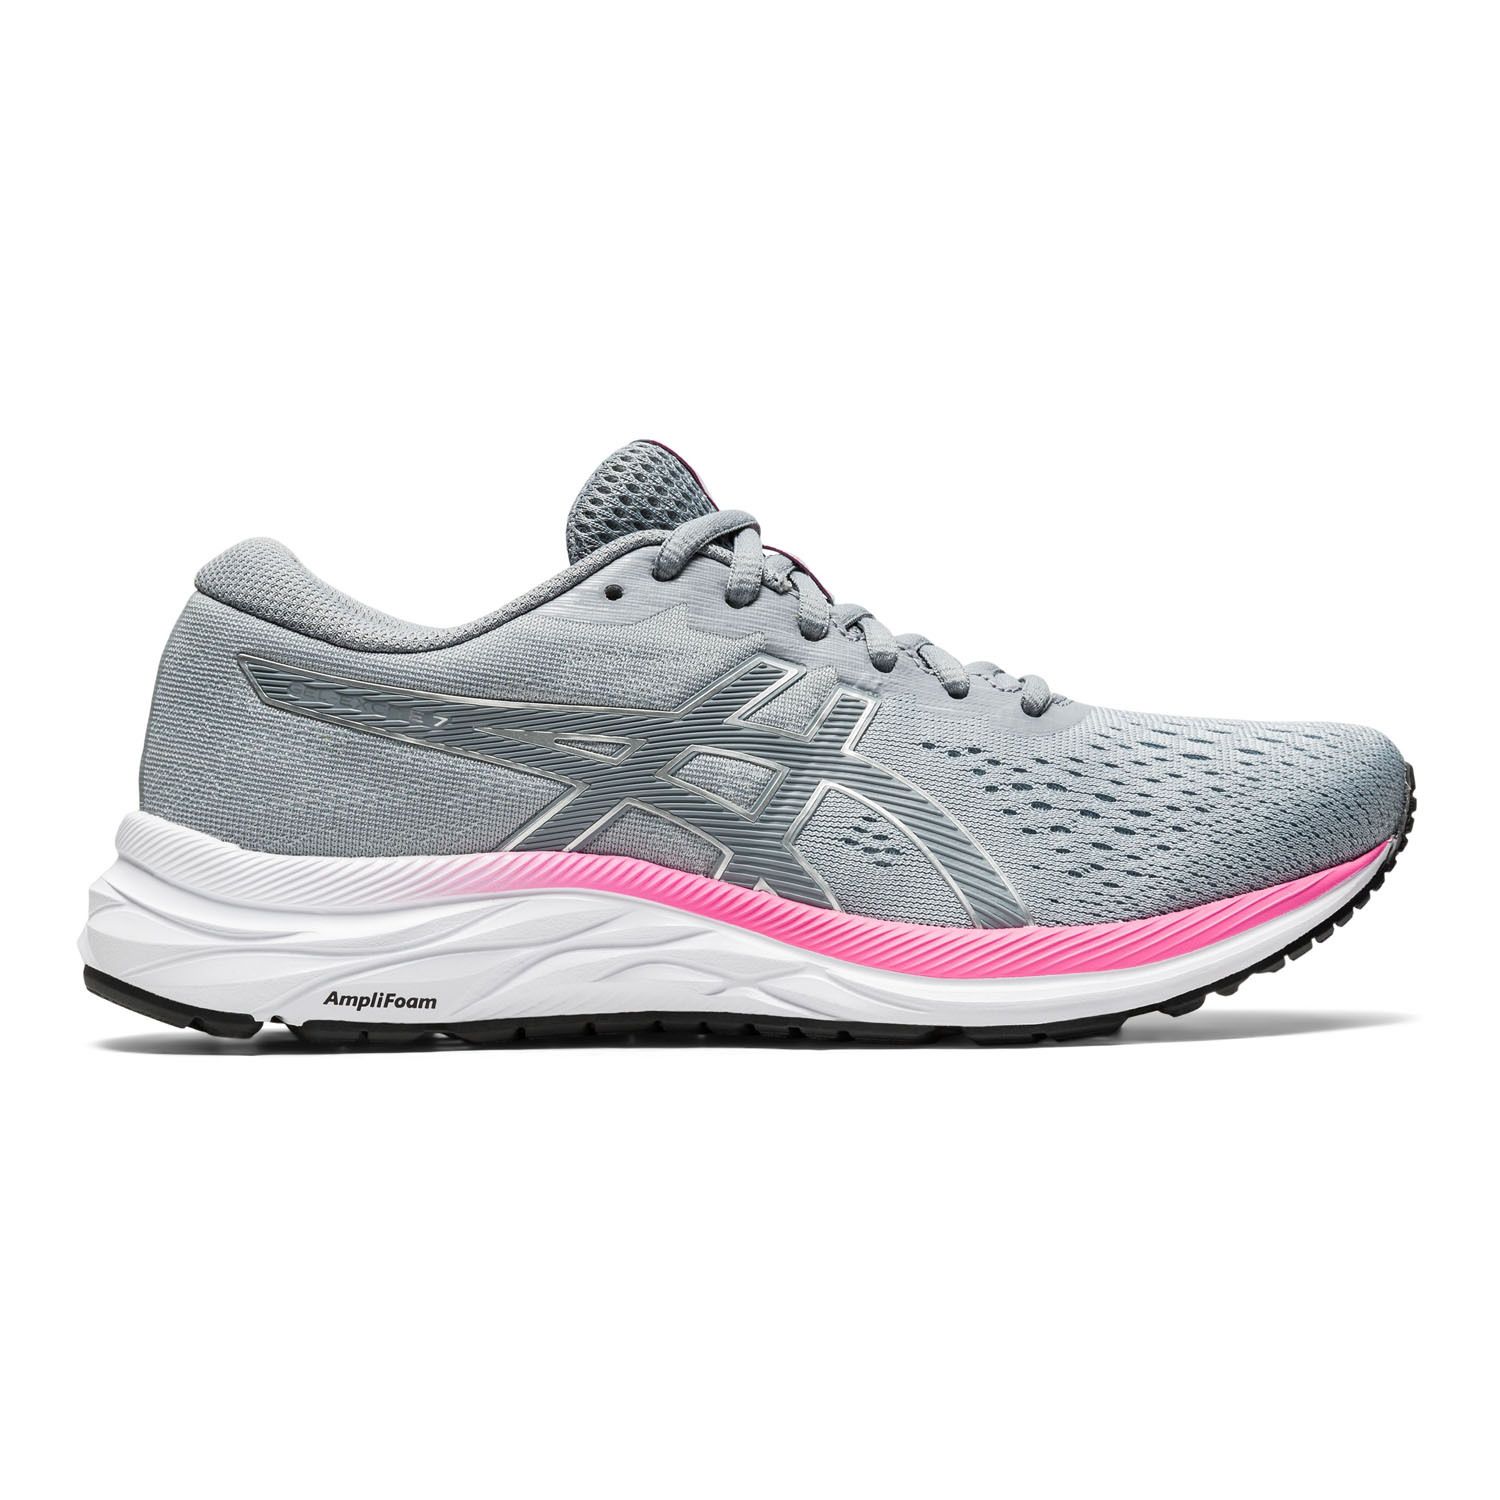 asic running shoes clearance